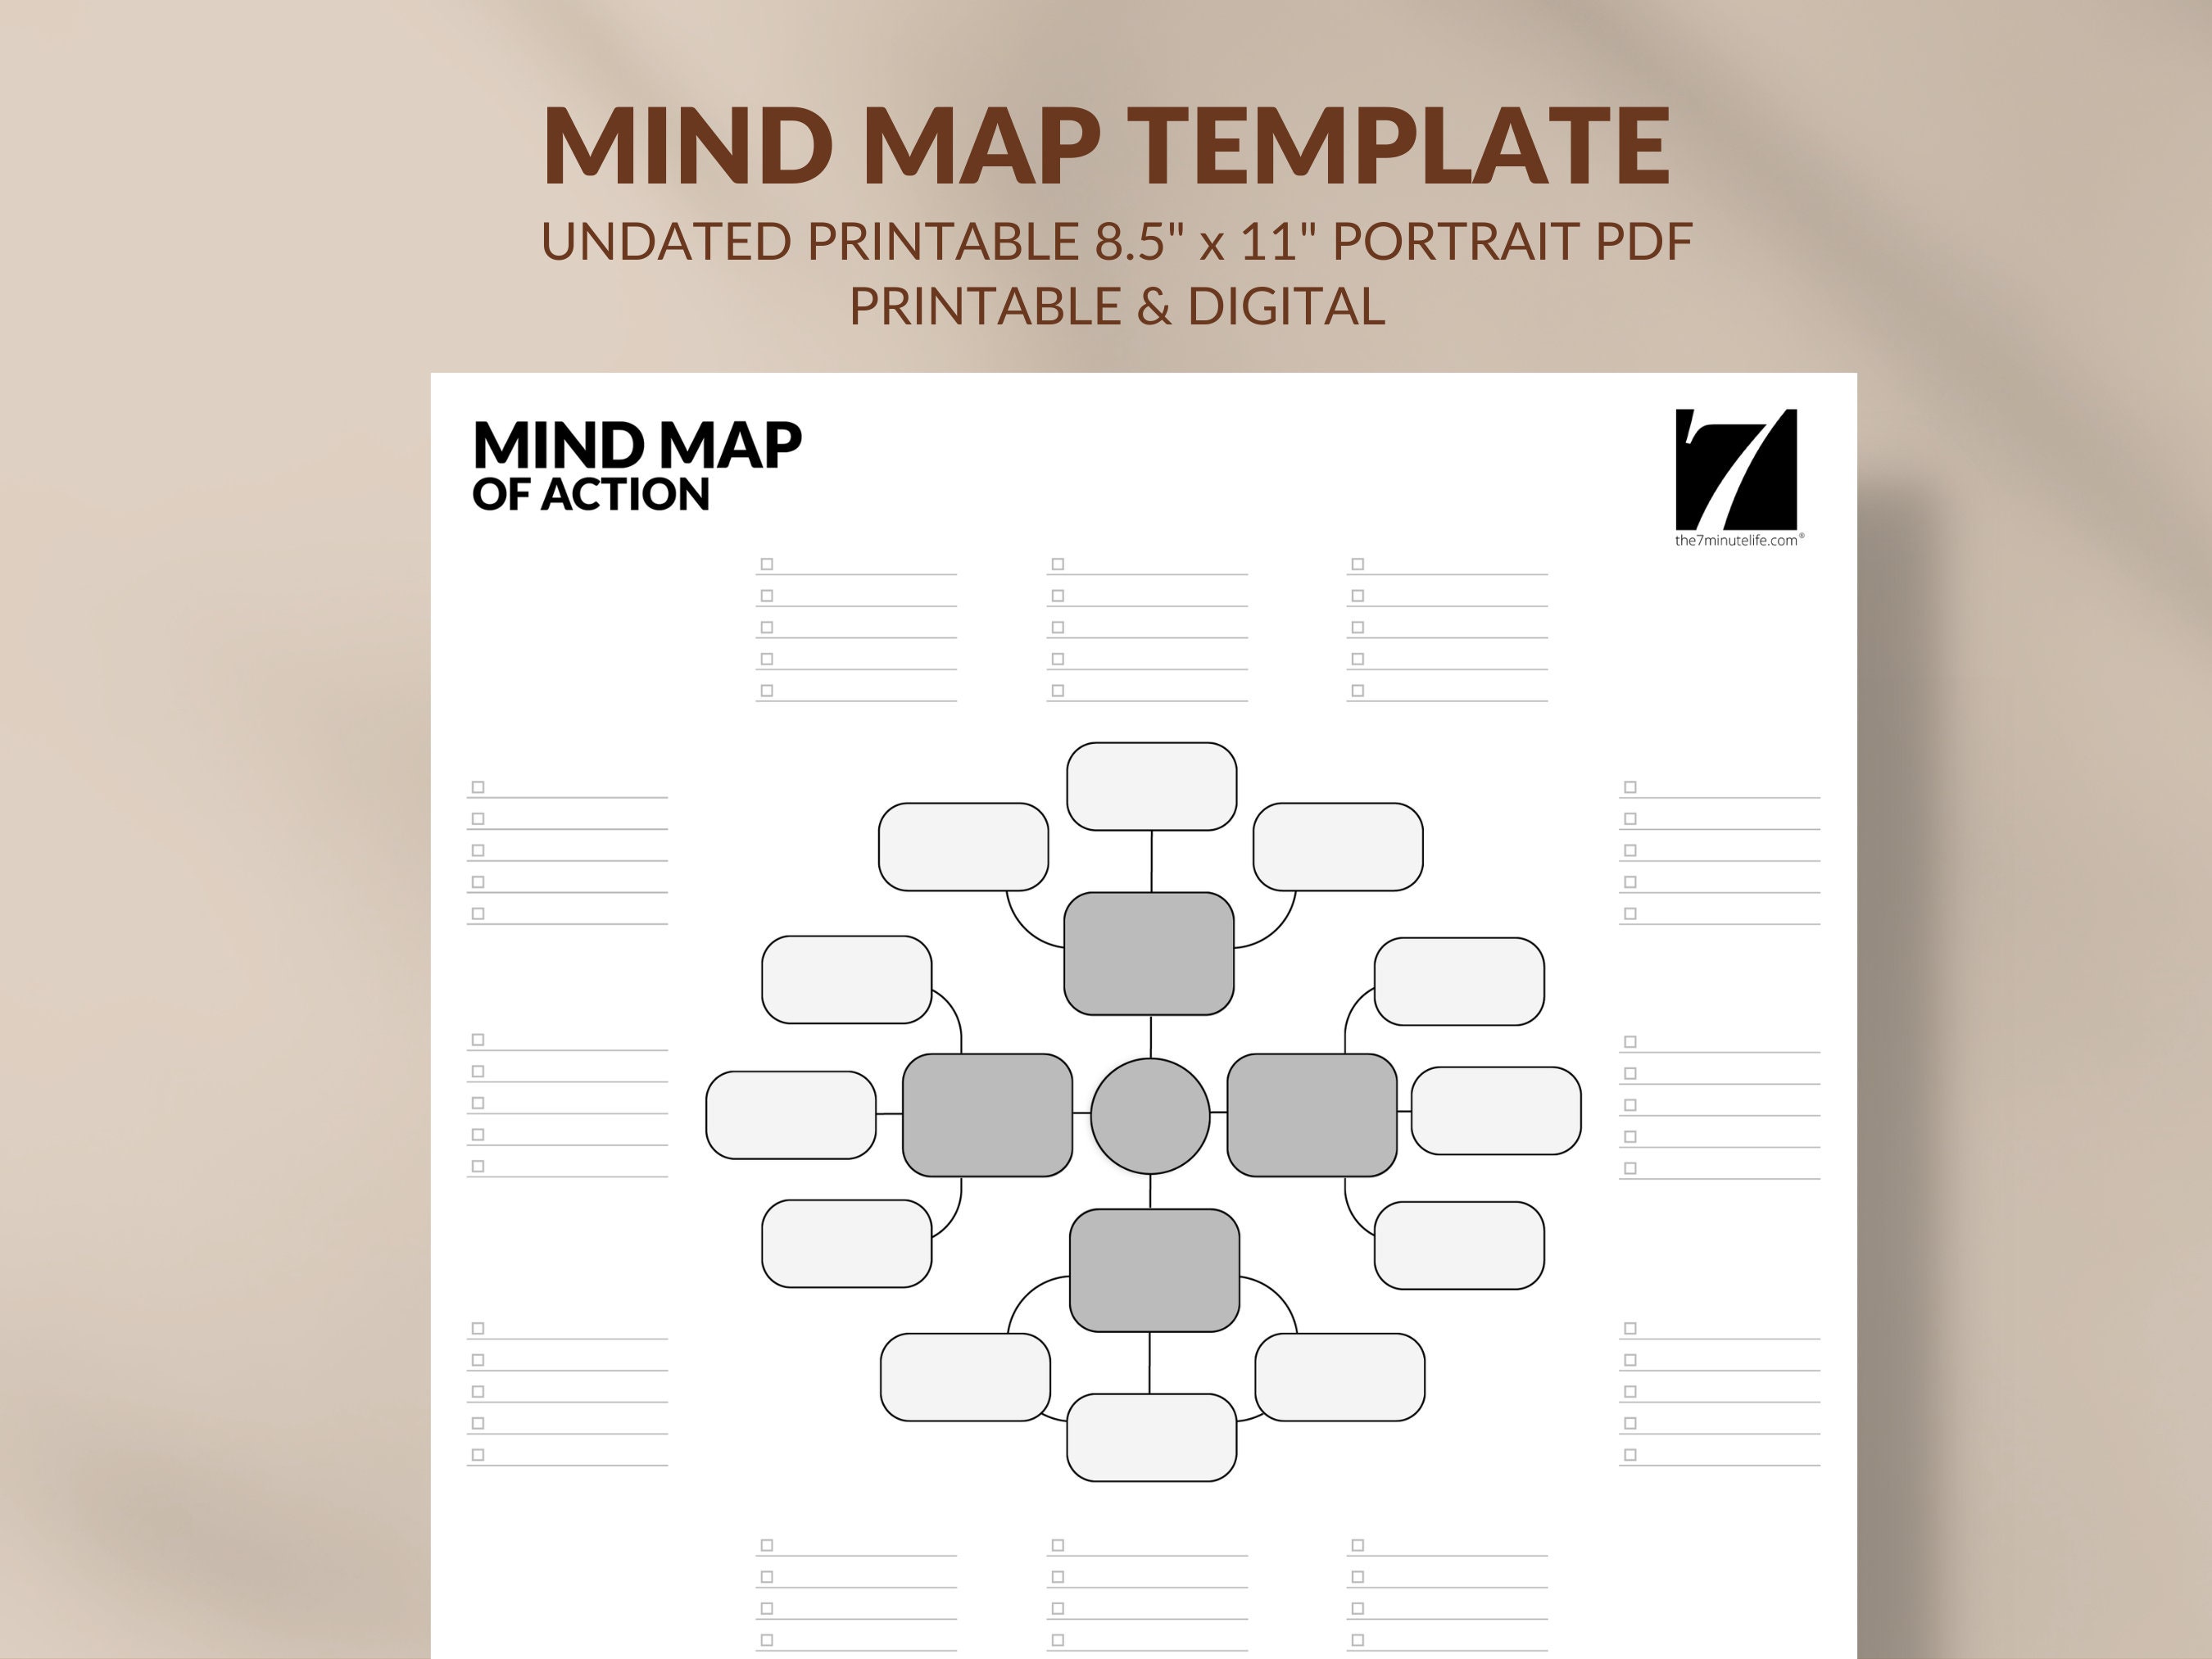 Book Summary Printable Mind Map Atomic Habits by James Clear A3, A2  Printable Mind Map 